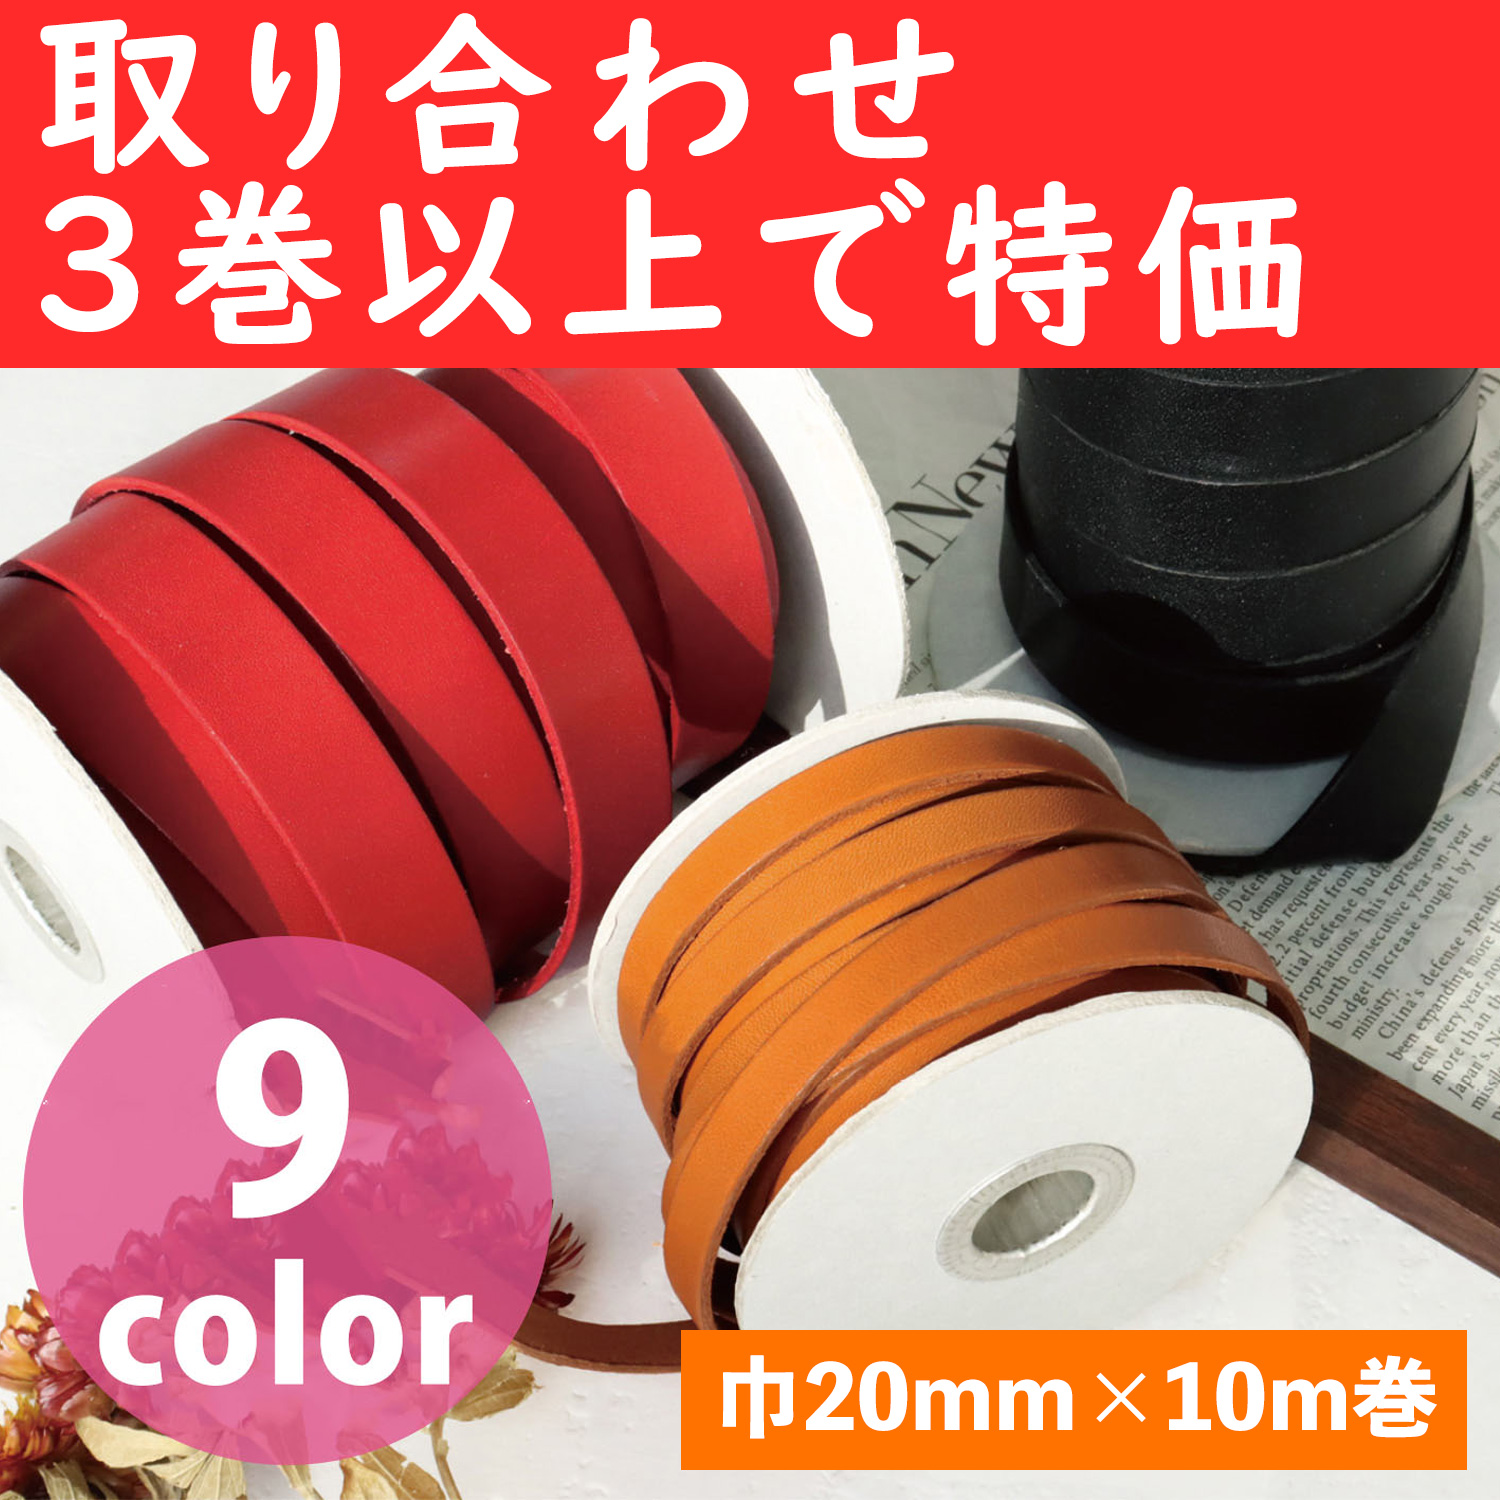 MTLS1020-OVER3 Special) Leather Tape, orders with 3rolls or more (roll)